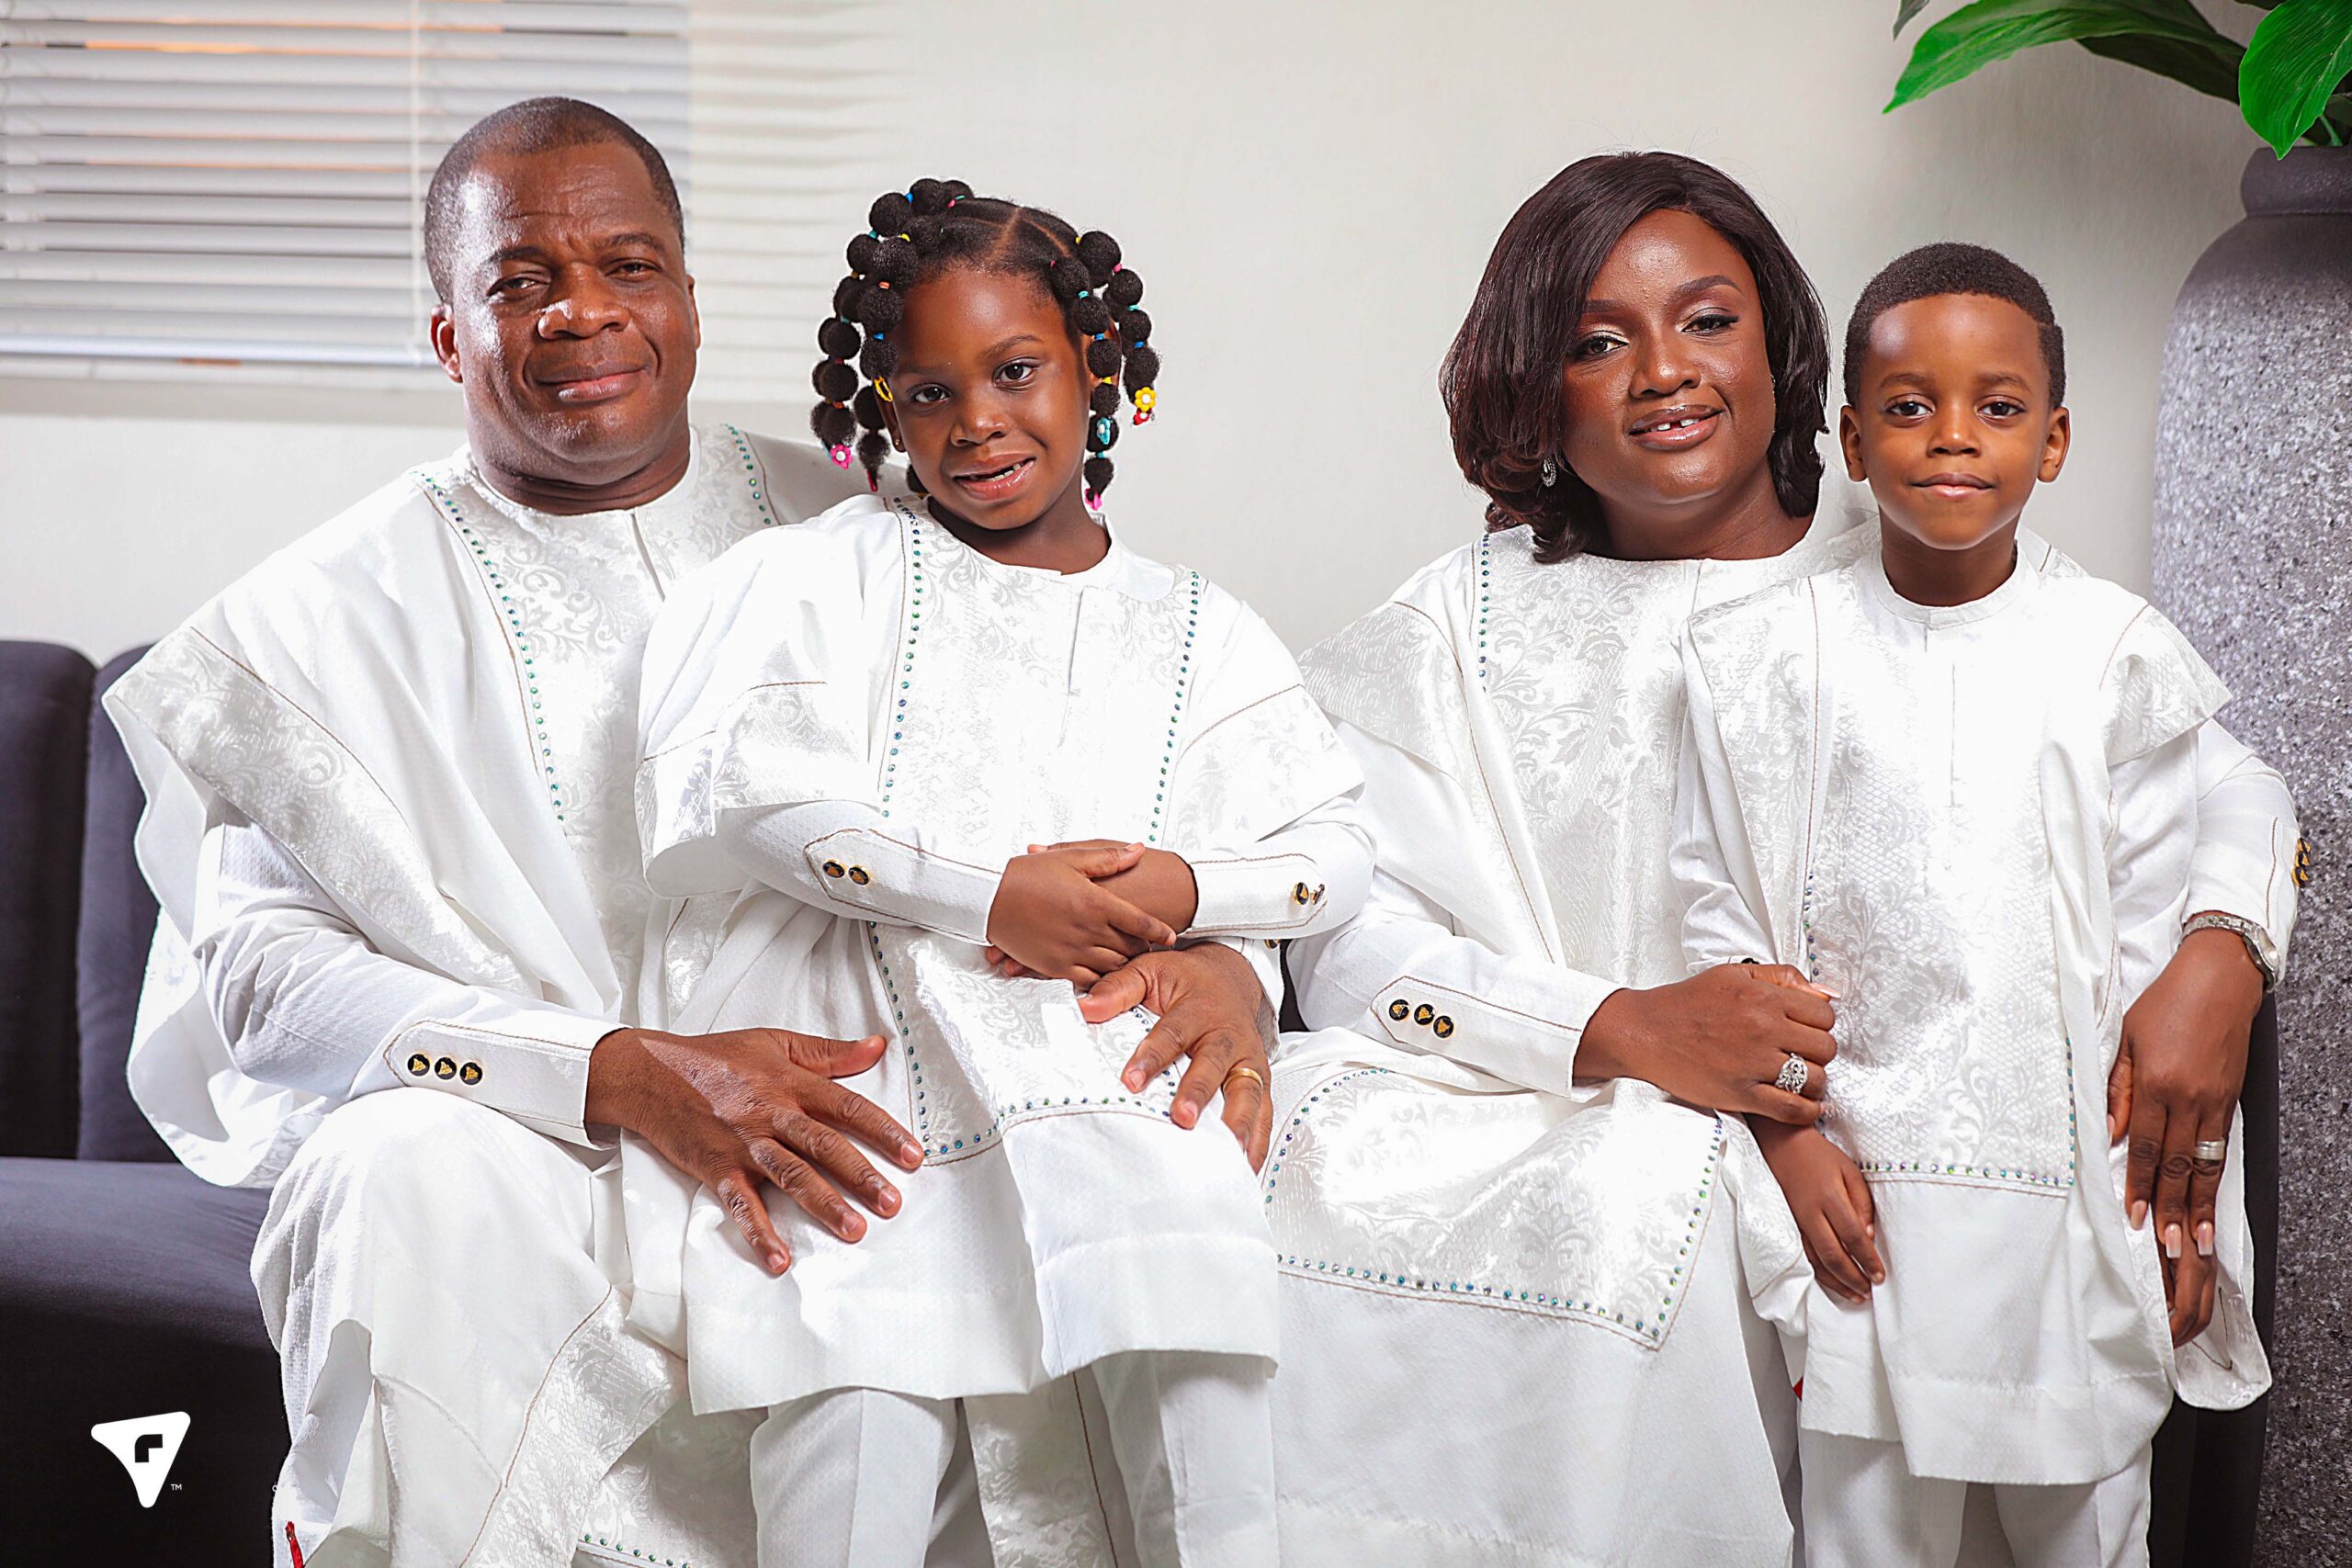 Rev. Wengam and his beautiful family